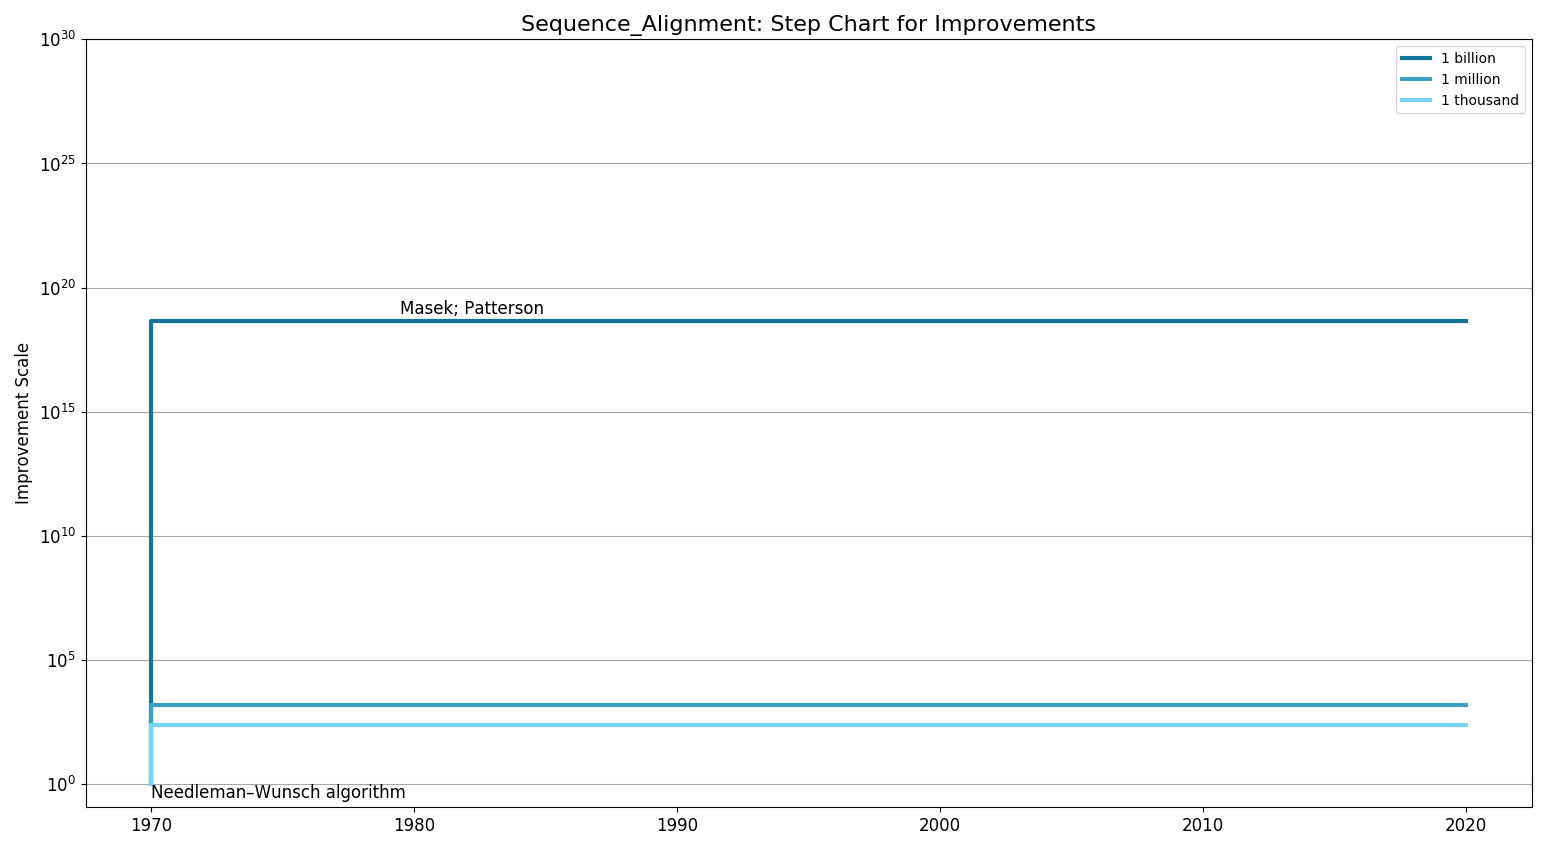 Sequence AlignmentStepChart.png